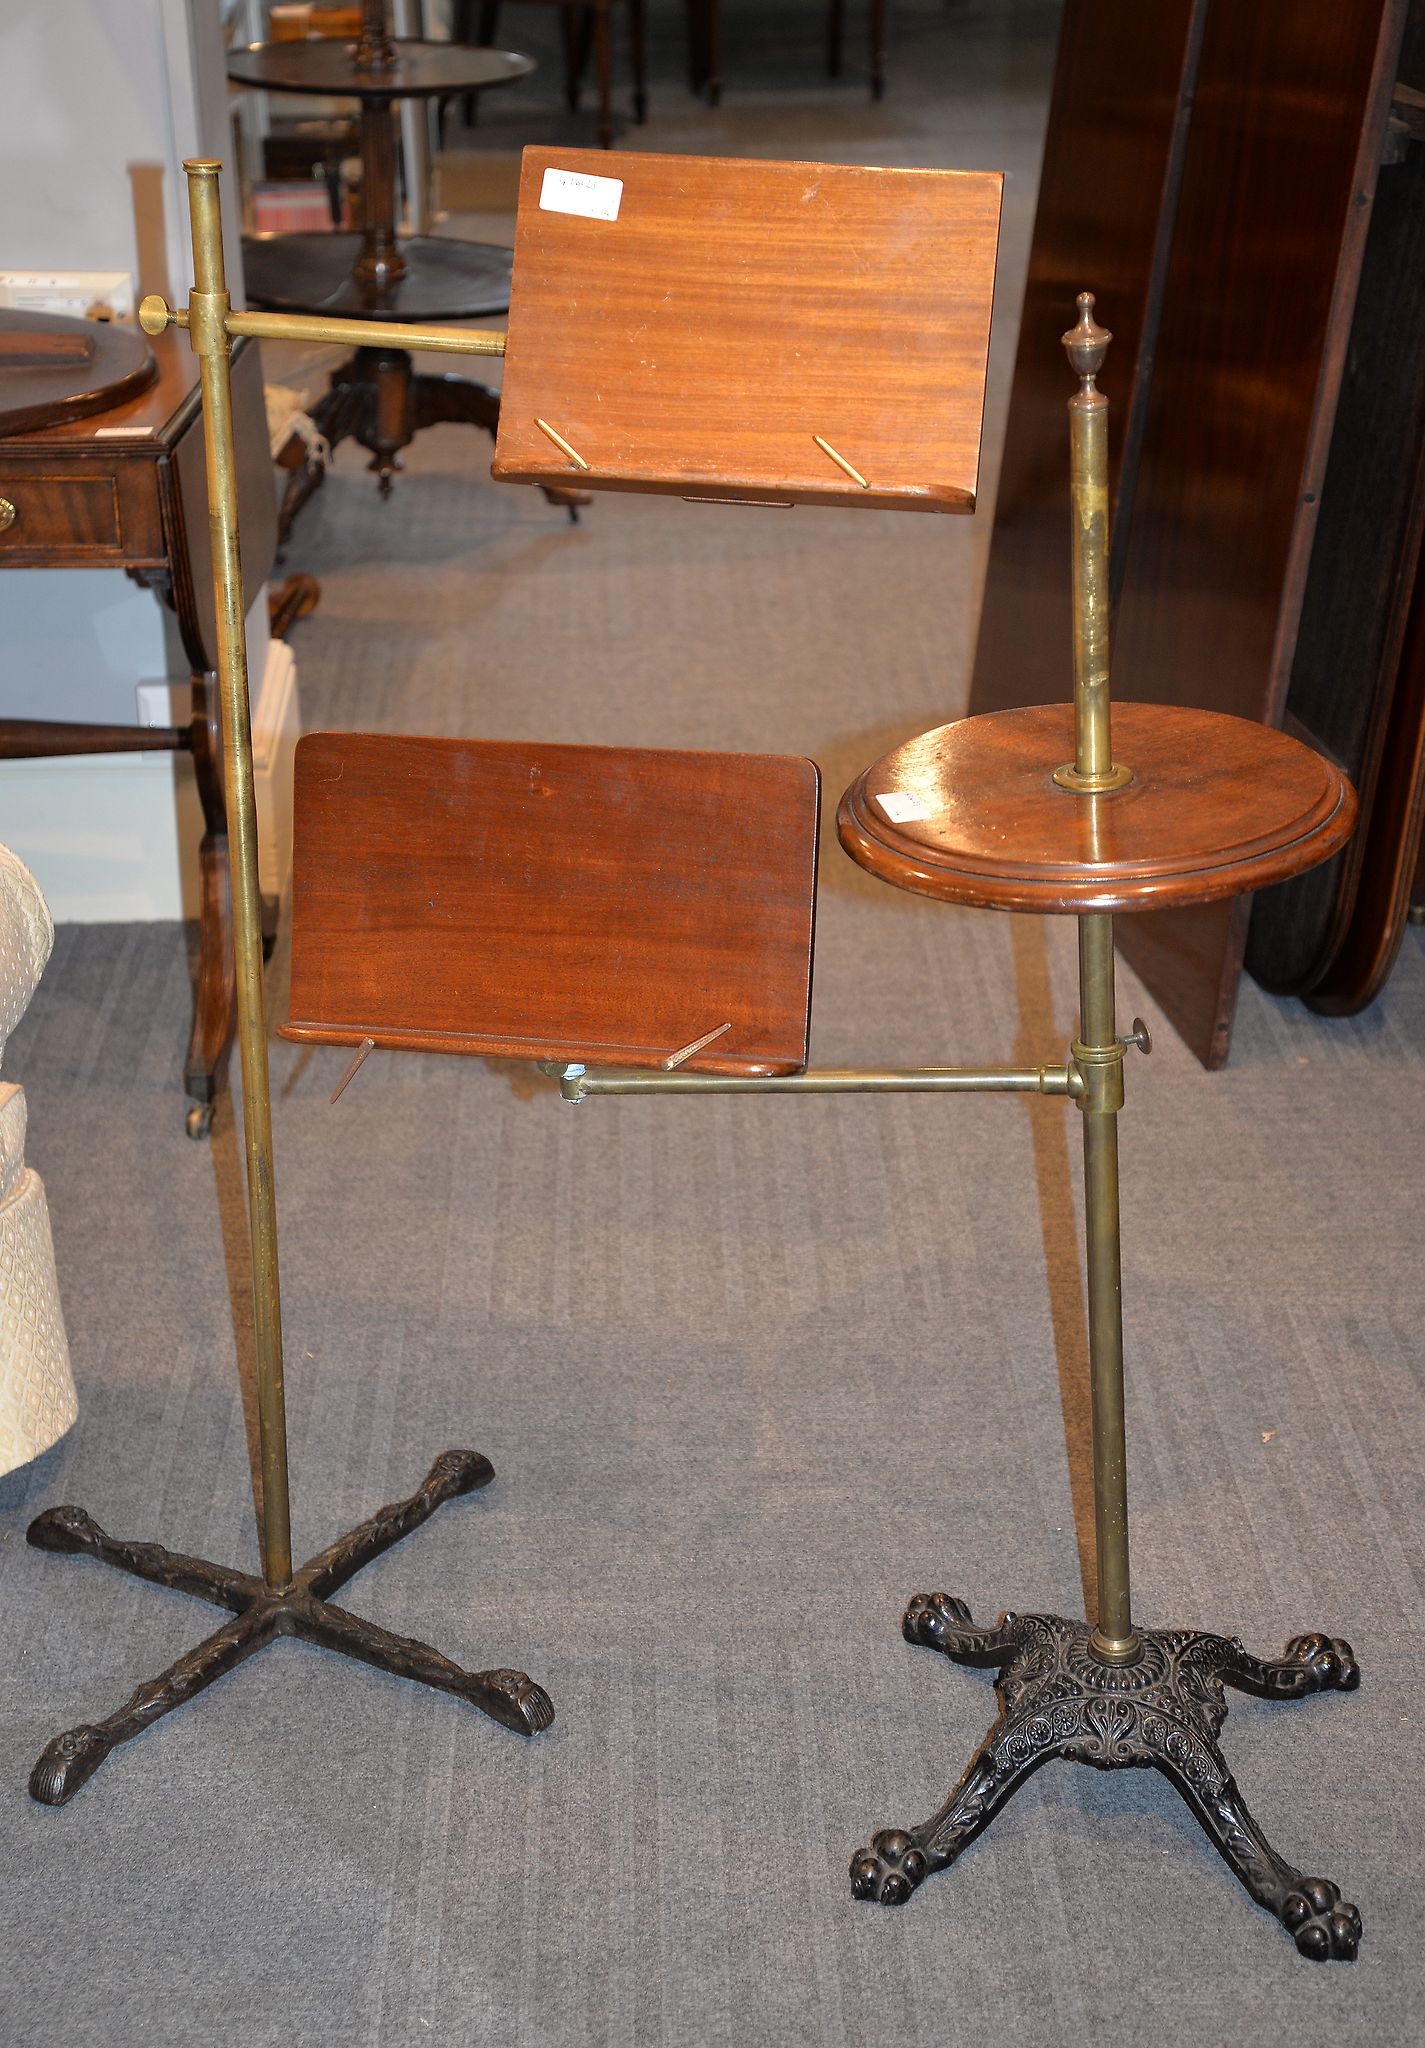 A Carter's patent reading table, with enamel label to rear, and another similar probably by the same